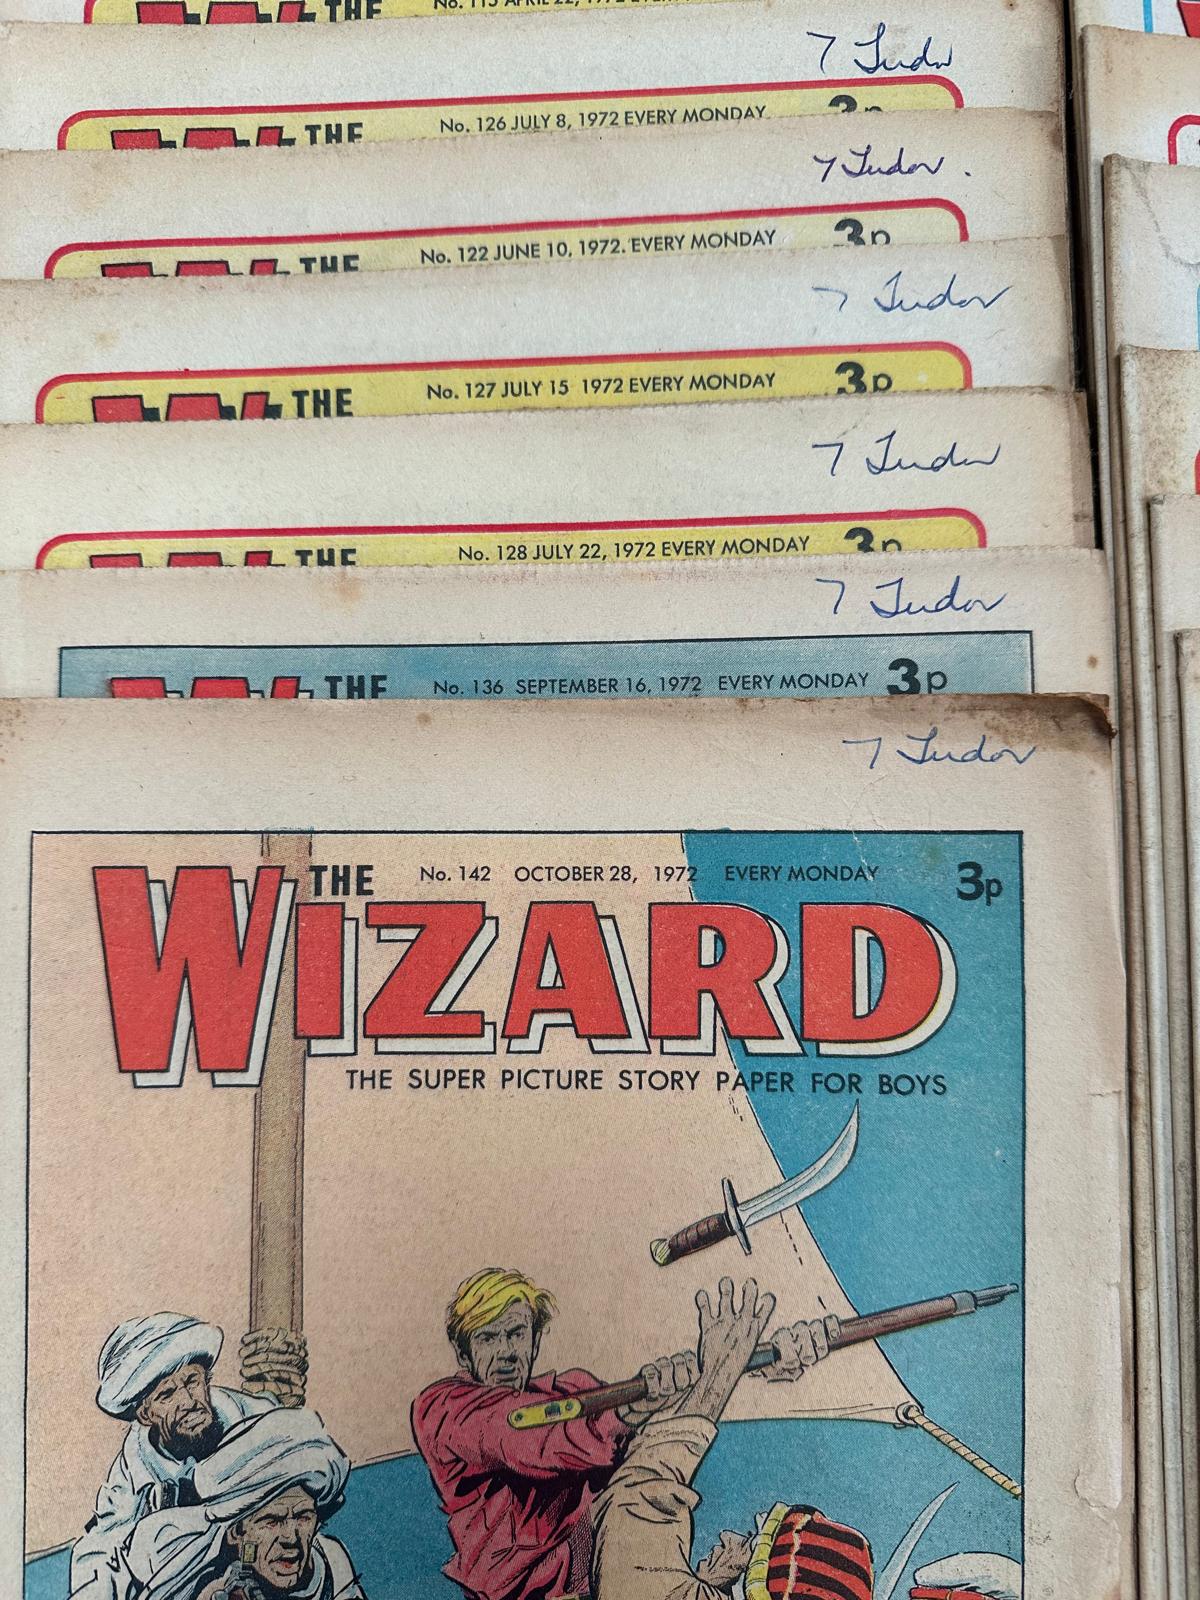 A collection of vintage The Wizard comics including issue 1 and 2 - Image 6 of 6